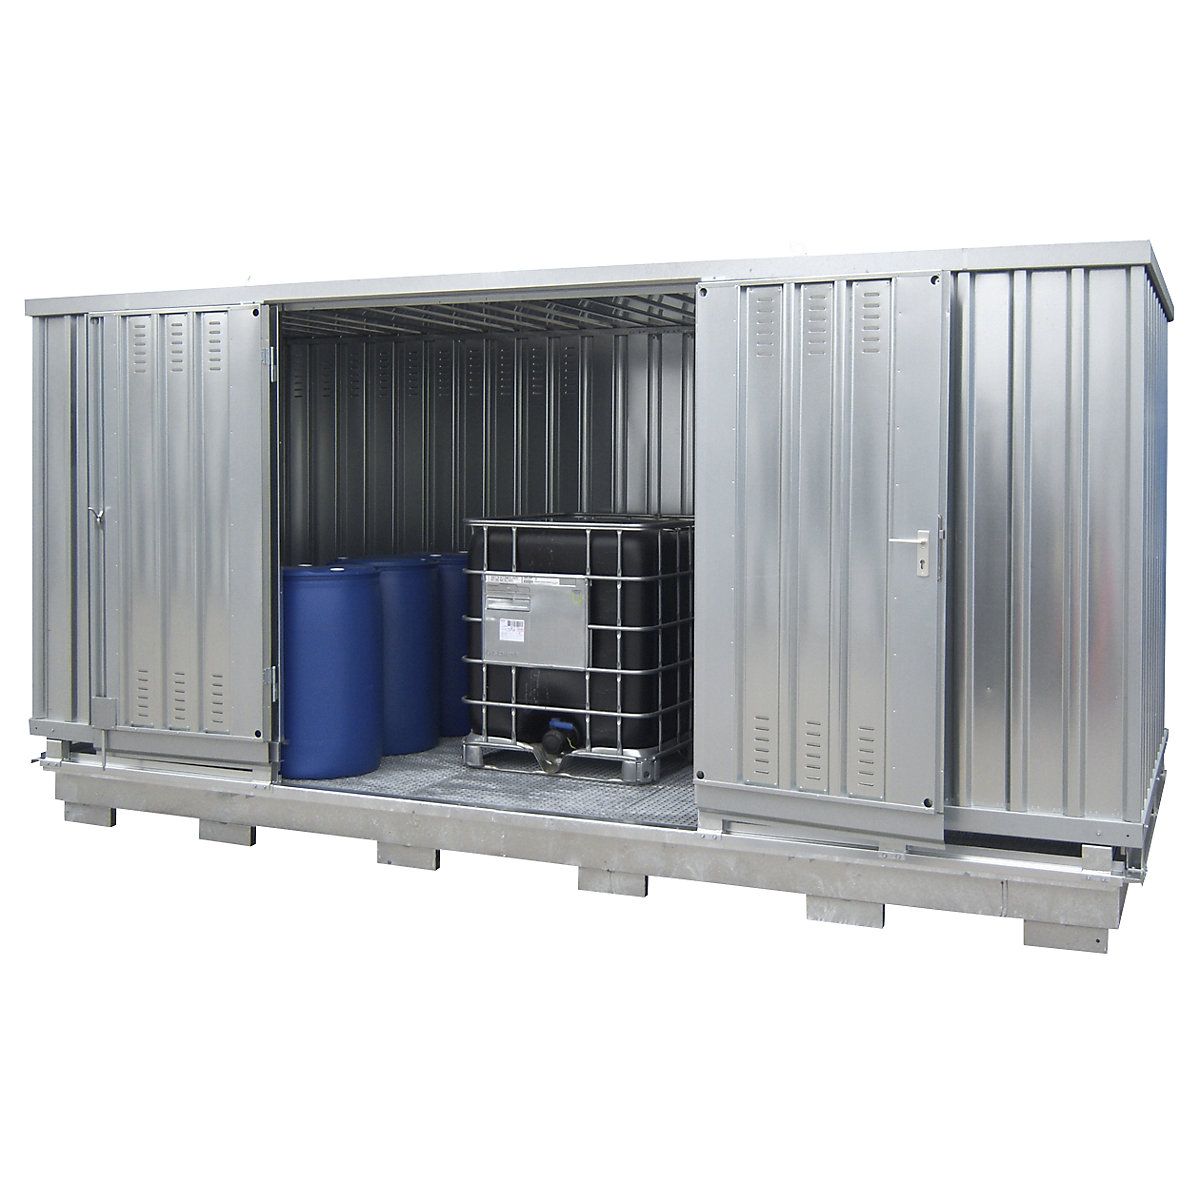 Hazardous goods container for the passive storage of flammable media, external HxWxD 2570 x 5075 x 2075 mm, zinc plated